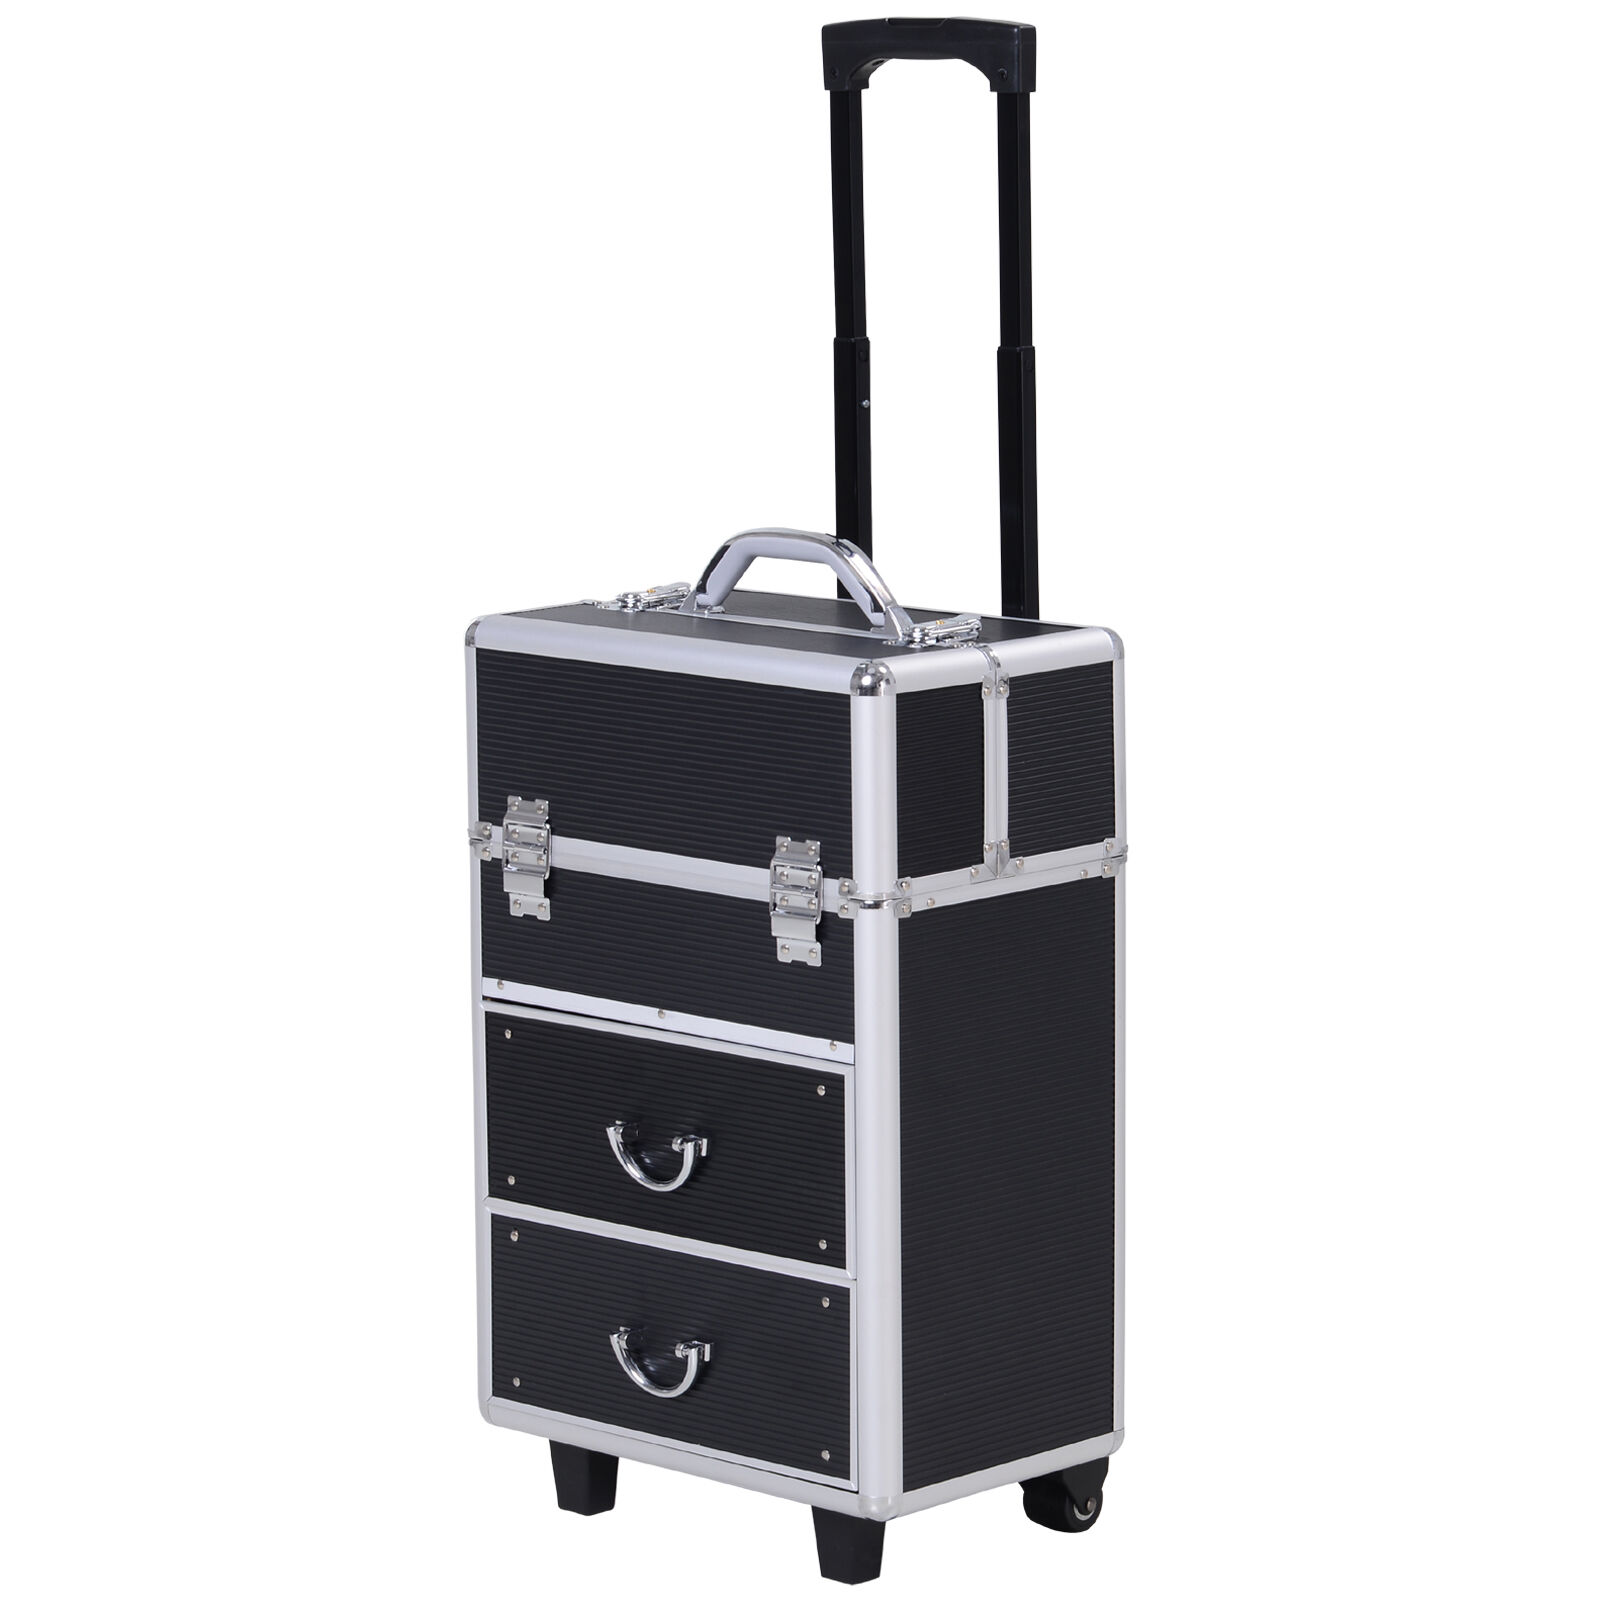 HOMCOM Professional Rolling Full Makeup Travel Train Case, Large Storage Cosmetic Trolley with Folding Trays, Drawer and Locks, Black